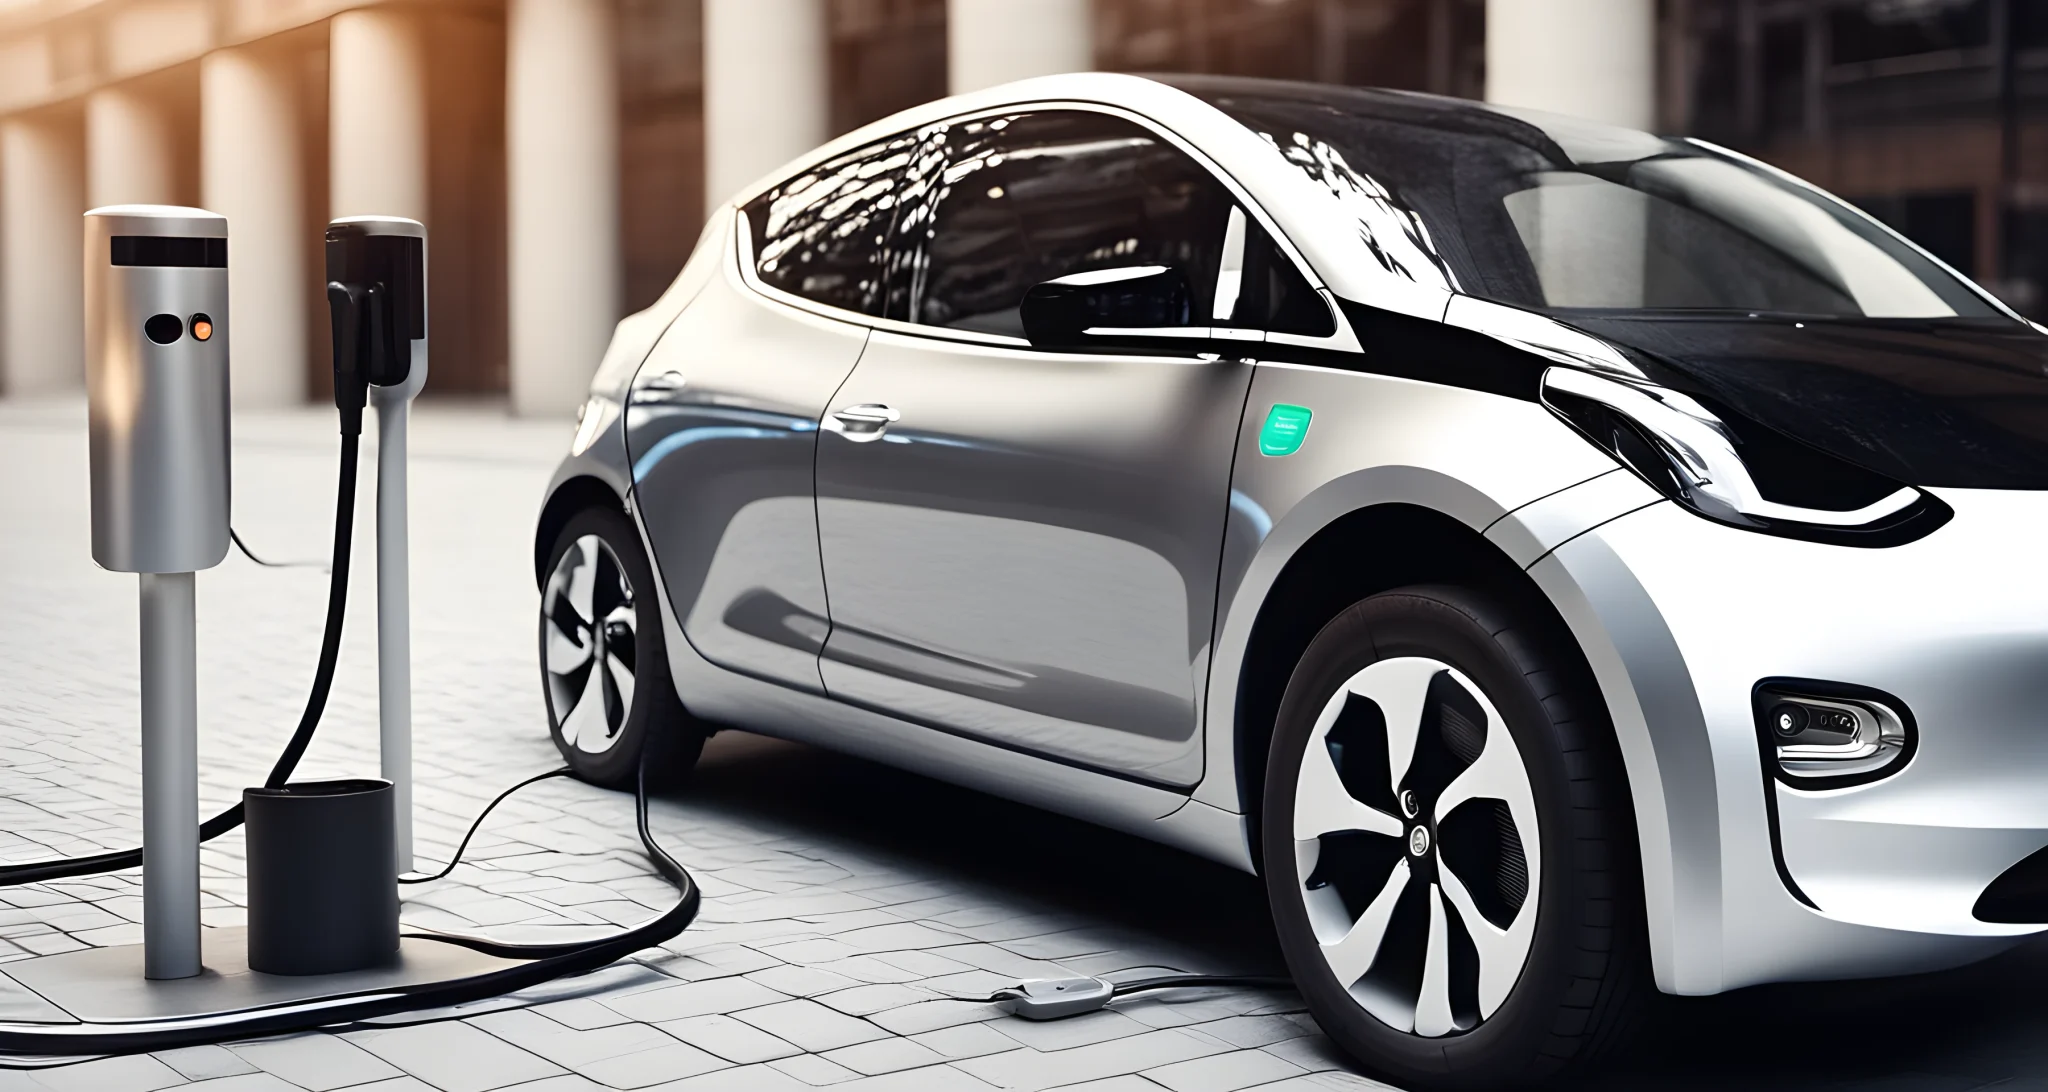 The image shows a sleek electric car charging at a station with a plug-in cord.